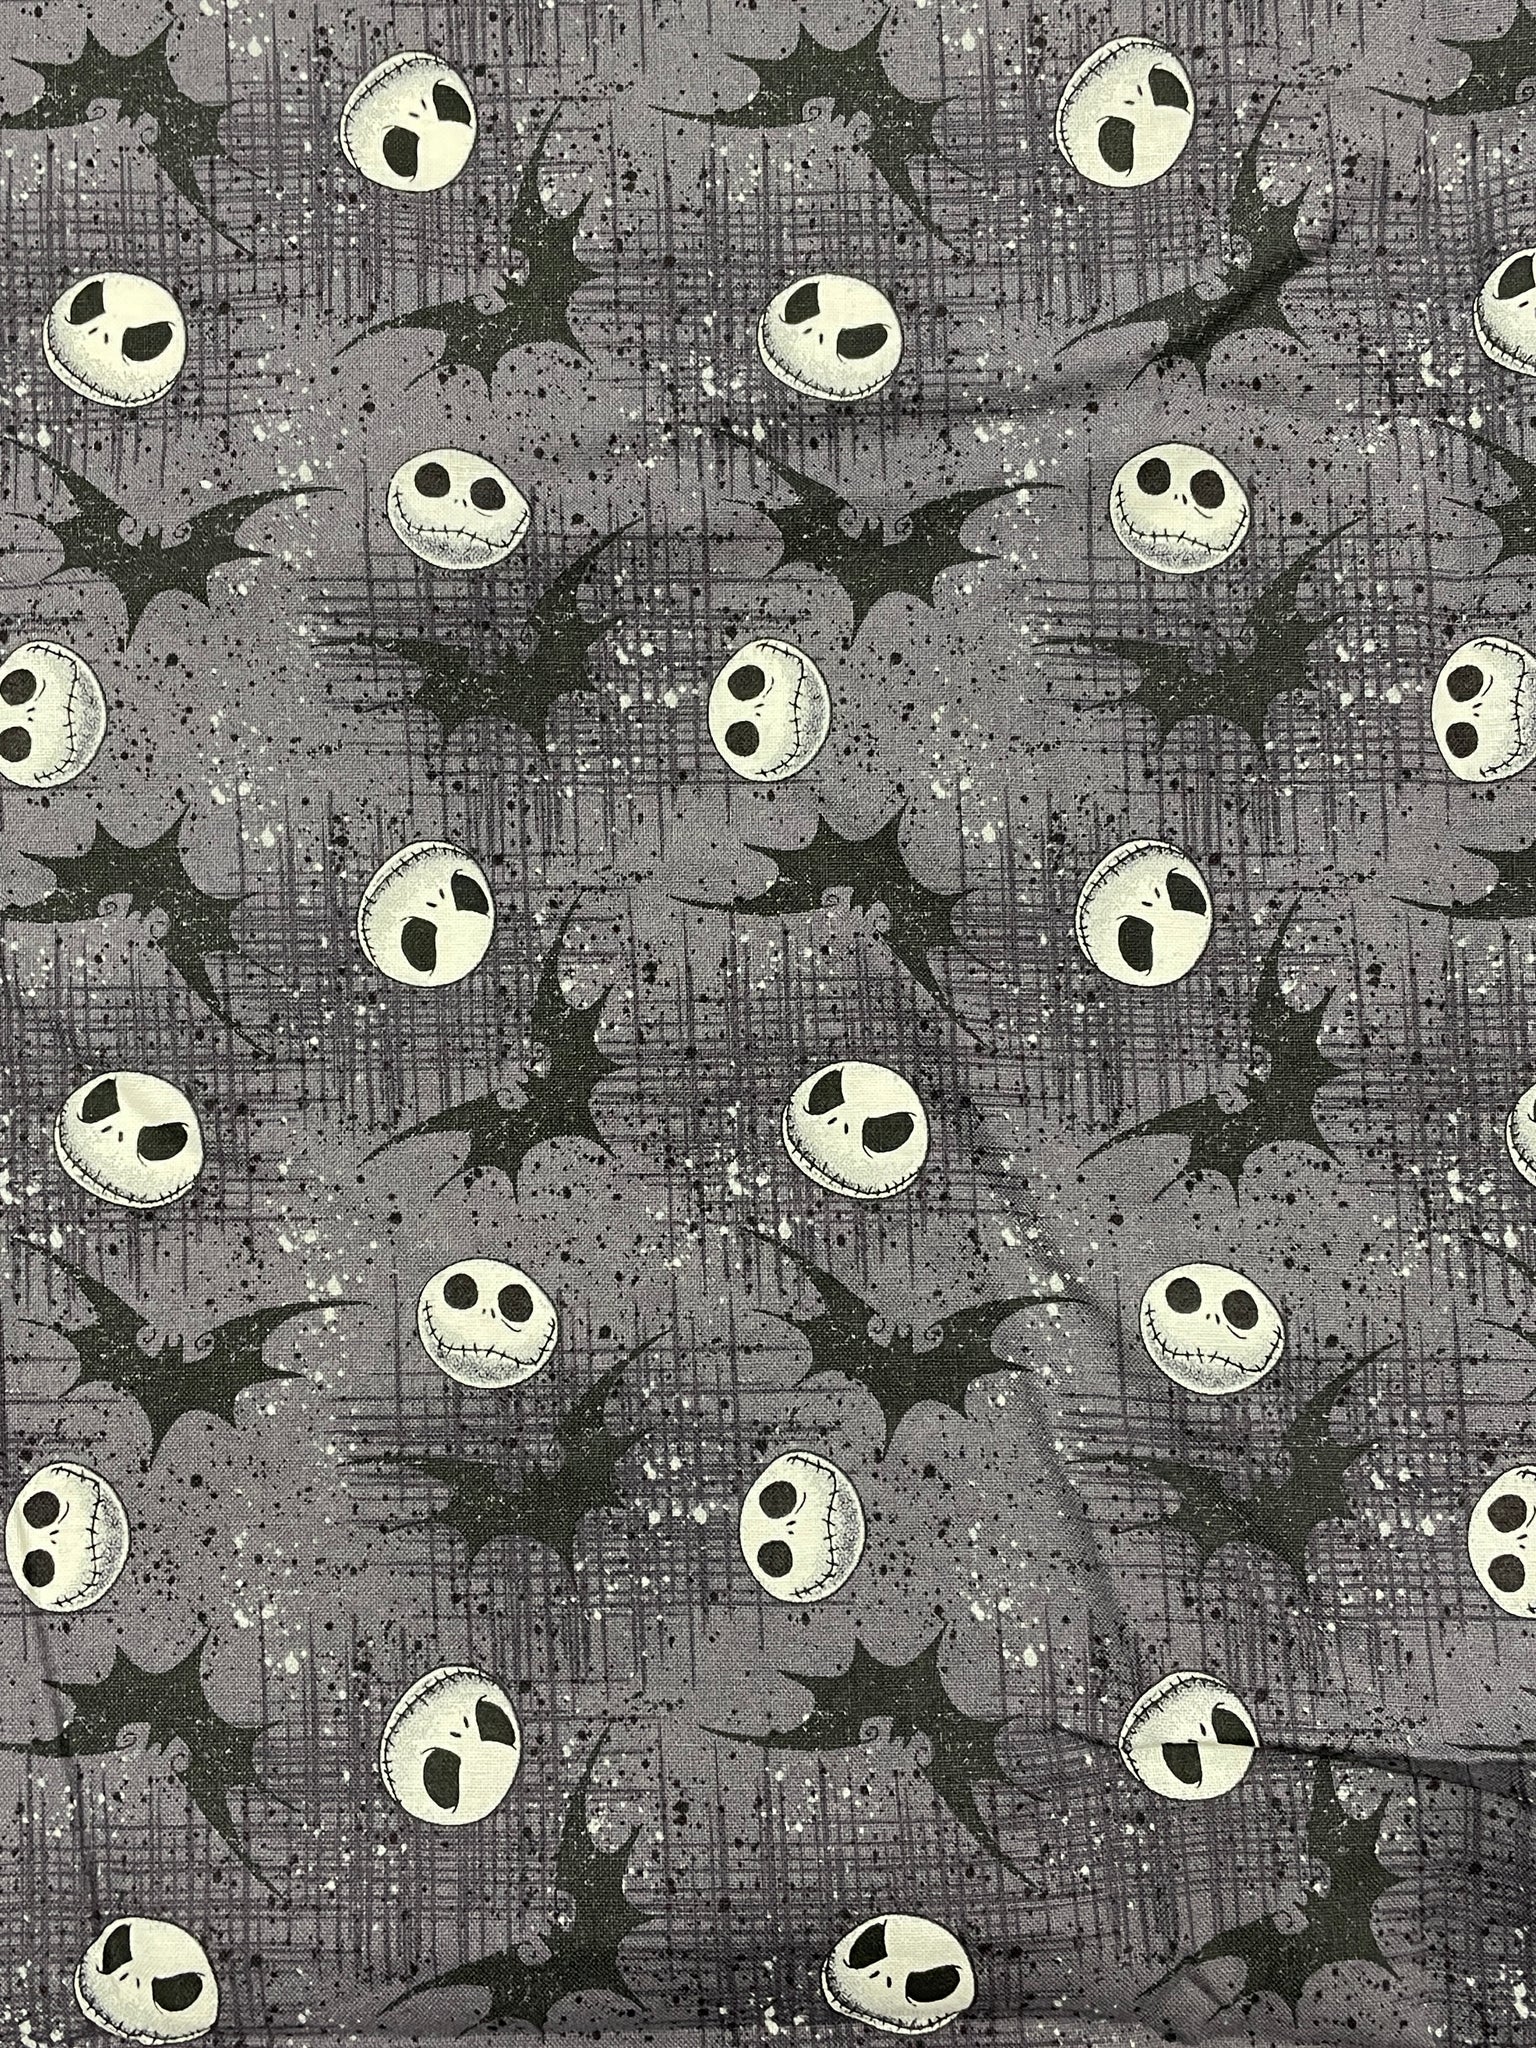 2020 4 YD Quilting Cotton - Gray with "Nightmare Before Christmas" Jack Skulls and Spiders